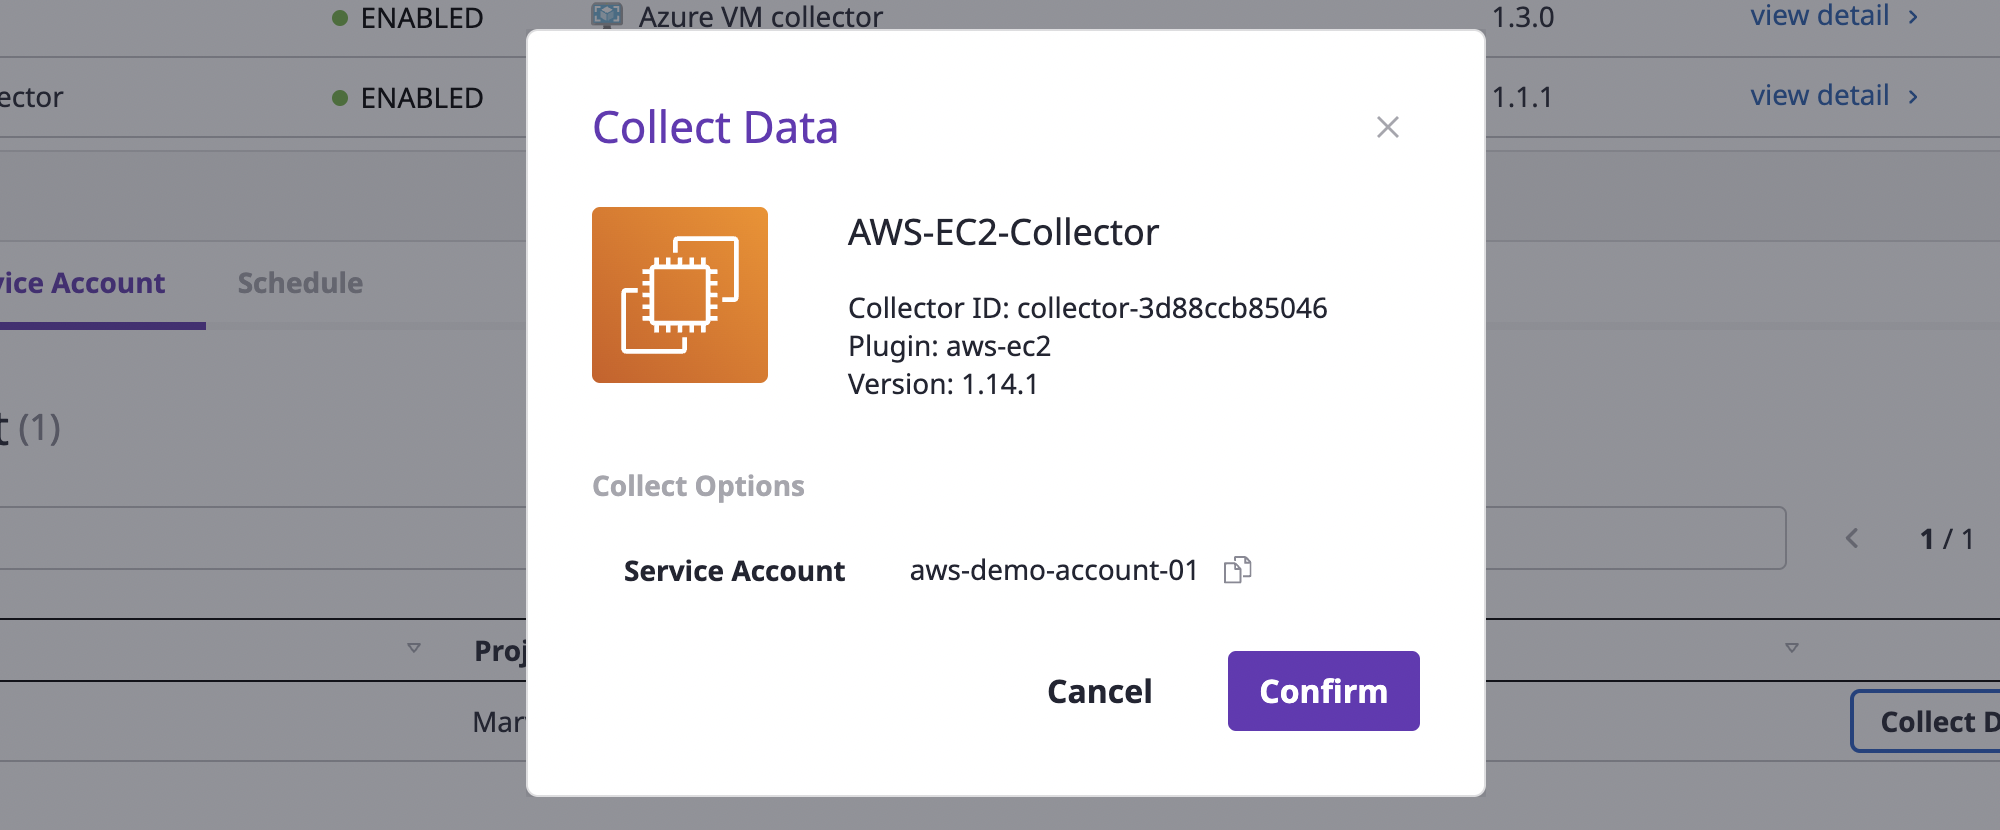 collector-data-collect-one-account-modal